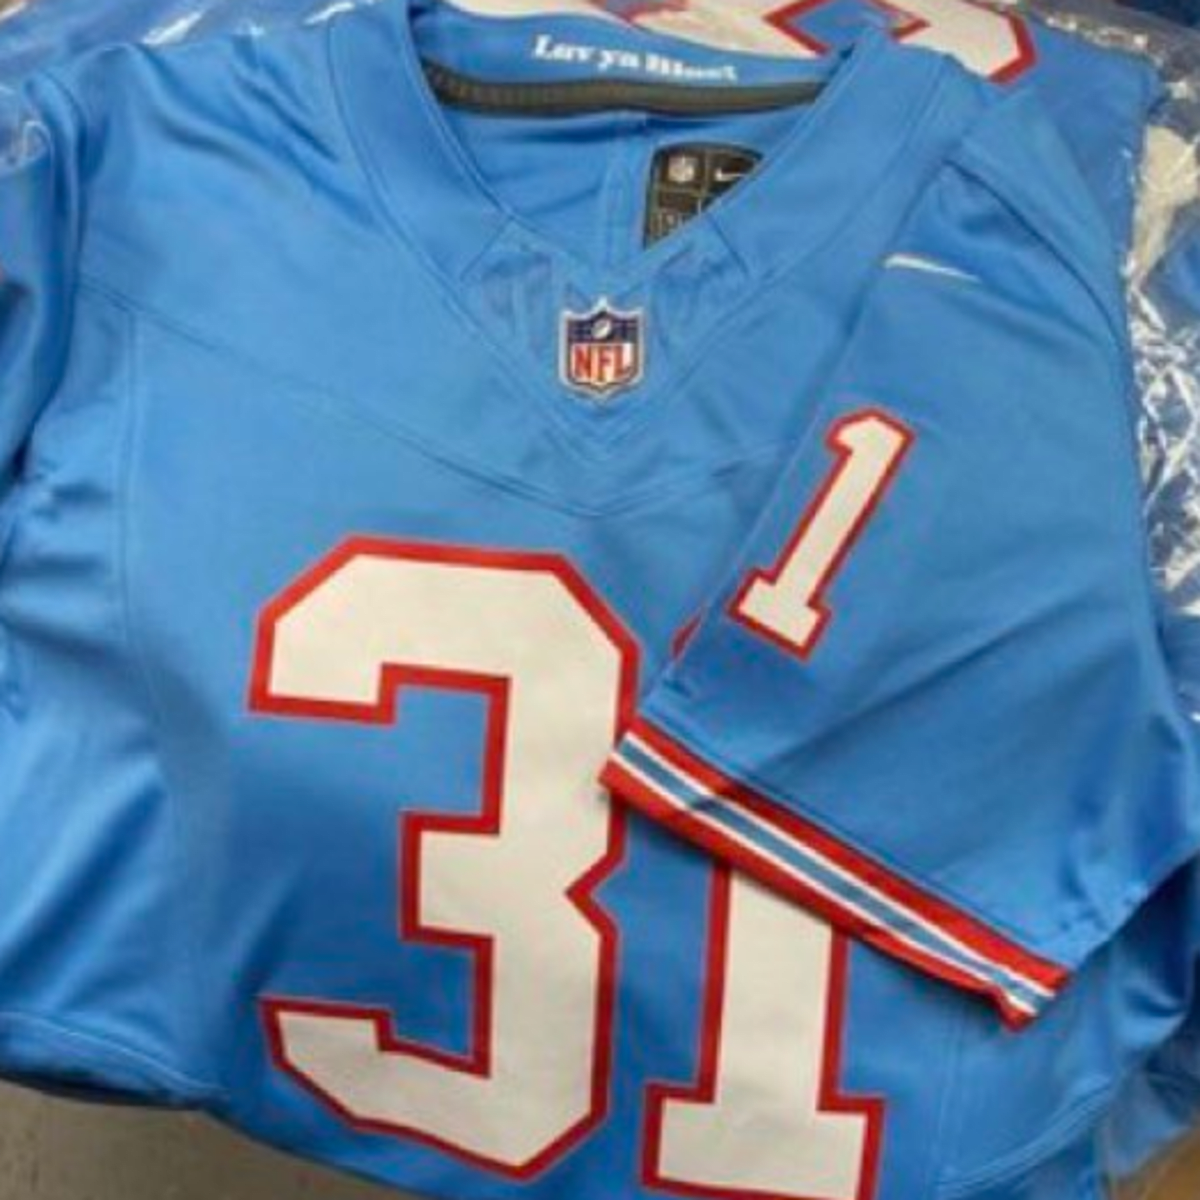 Titans tease throwback Oilers jerseys coming soon - A to Z Sports